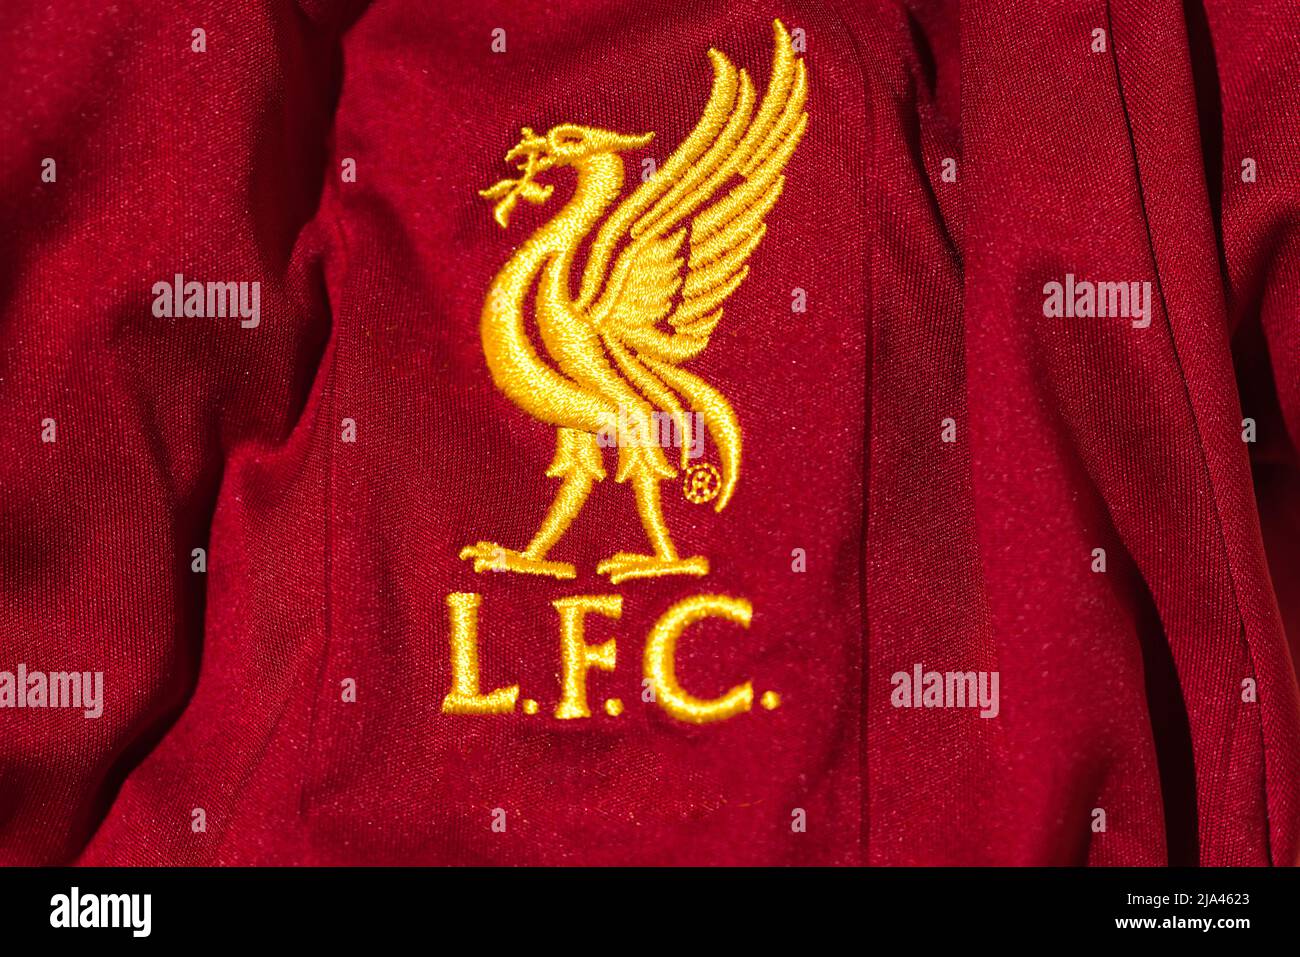 Shield on the shirt of Liverpool Football Club. Uefa champions league final concept on May 28, 2022, champion, europe, premiere league, reds. Stock Photo